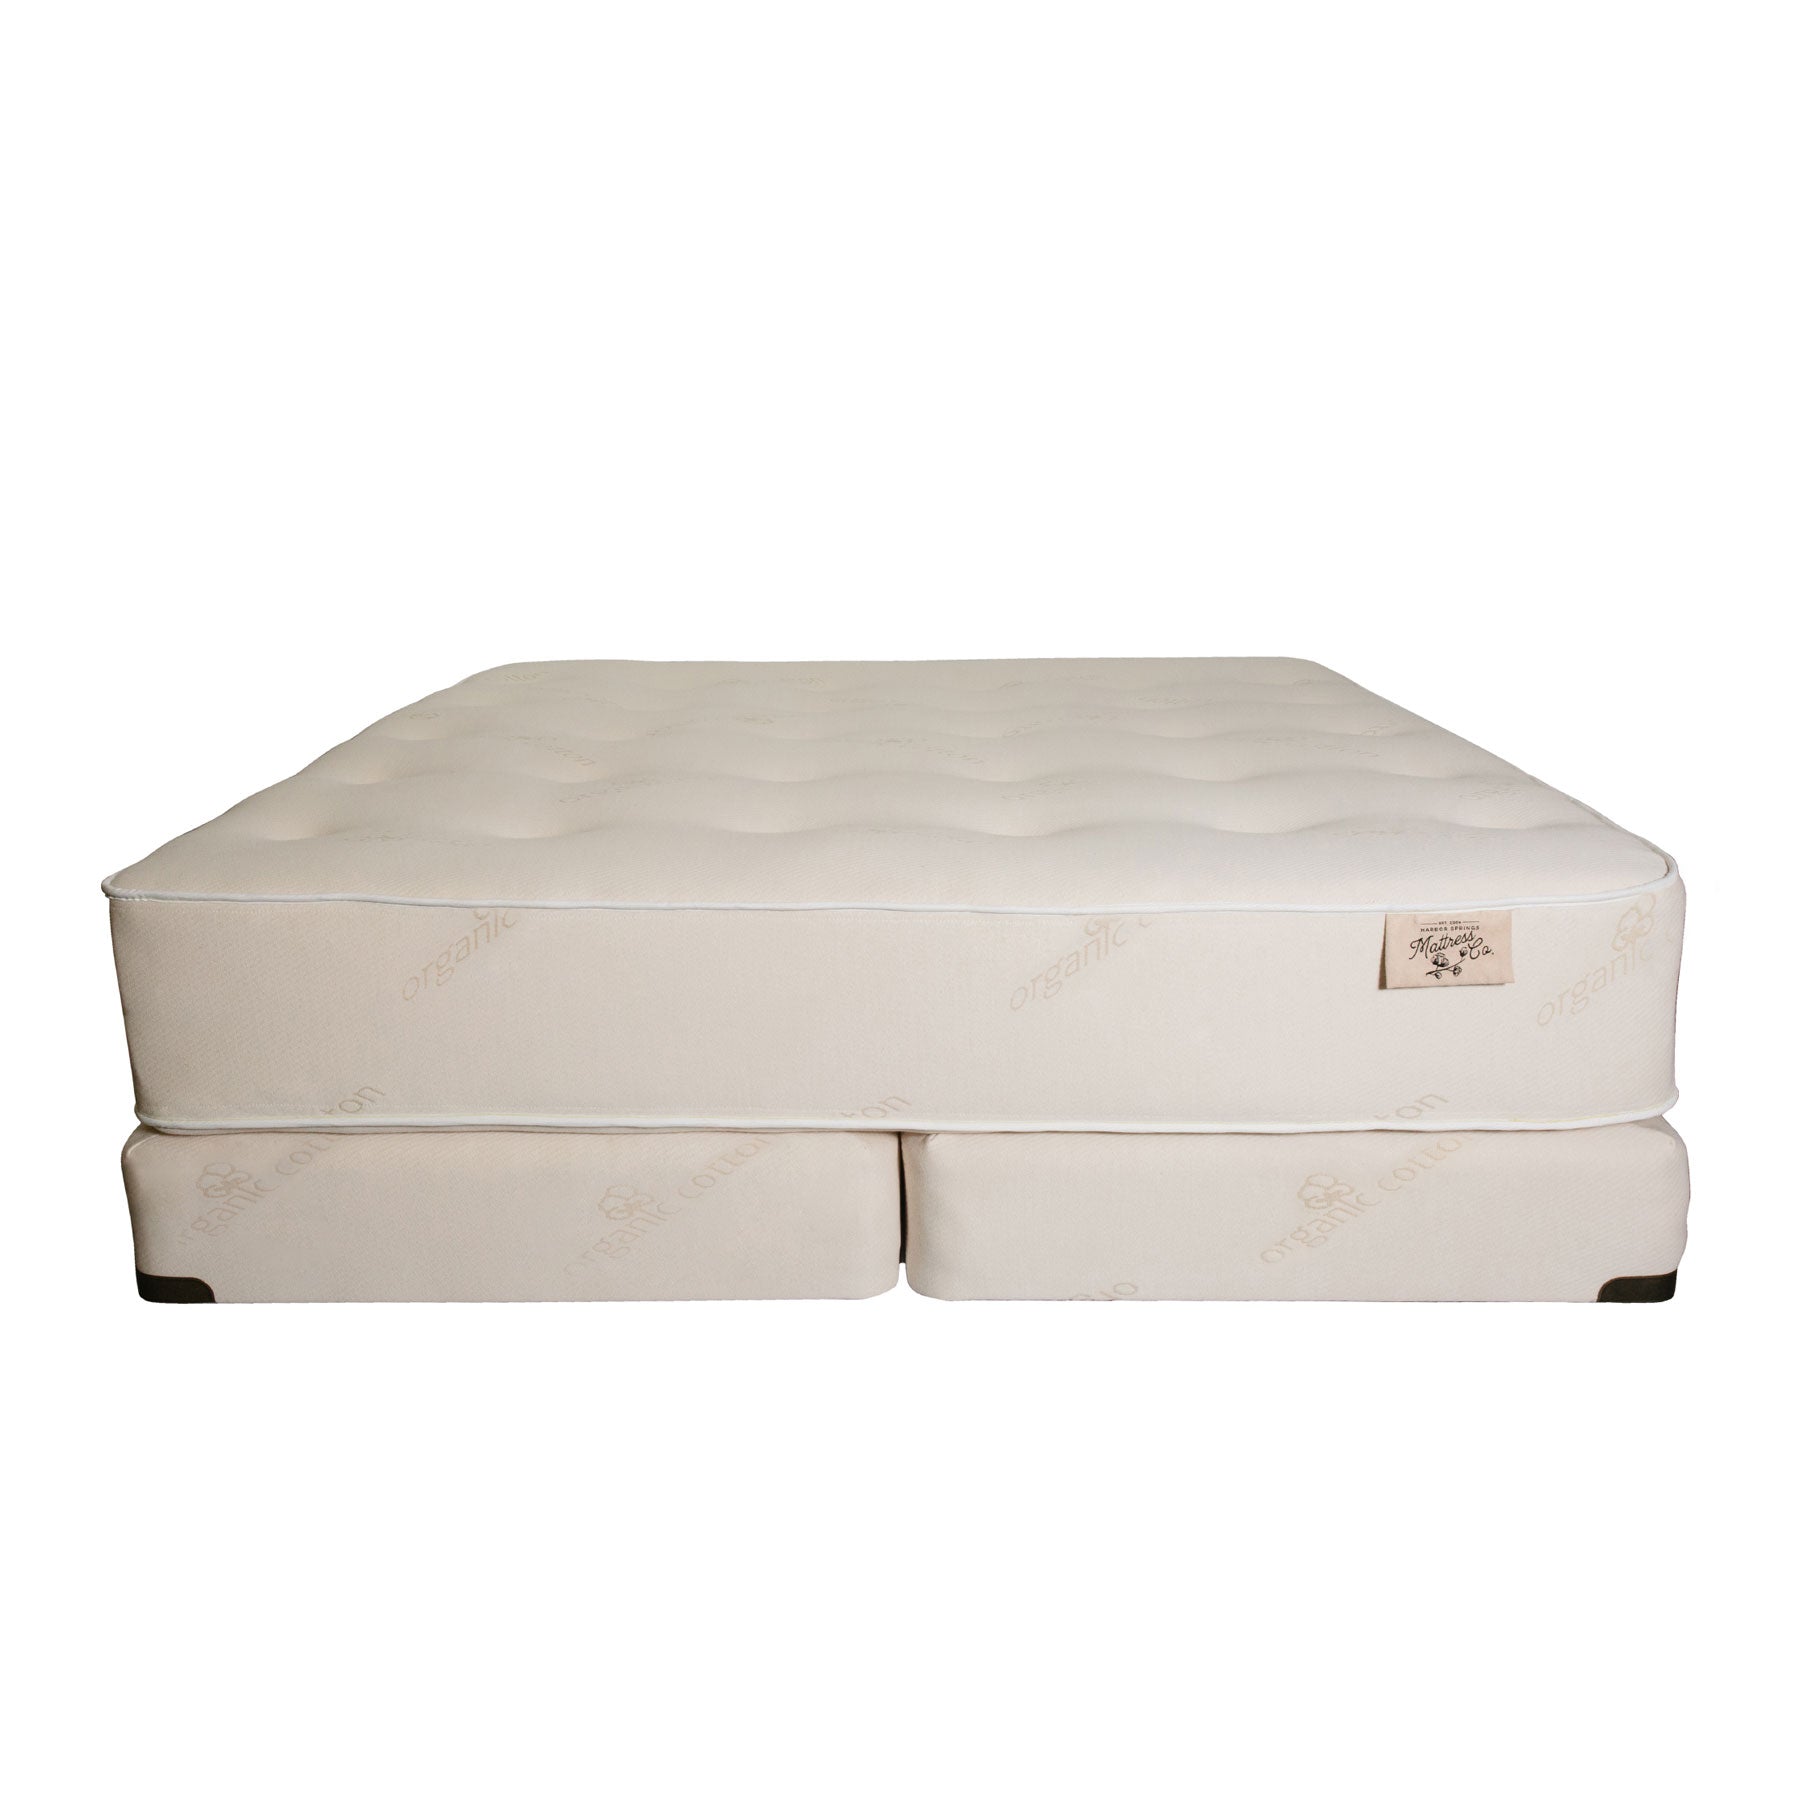 The Cozy - Natural Latex Luxury Bed - Harbor Springs Mattress Co.